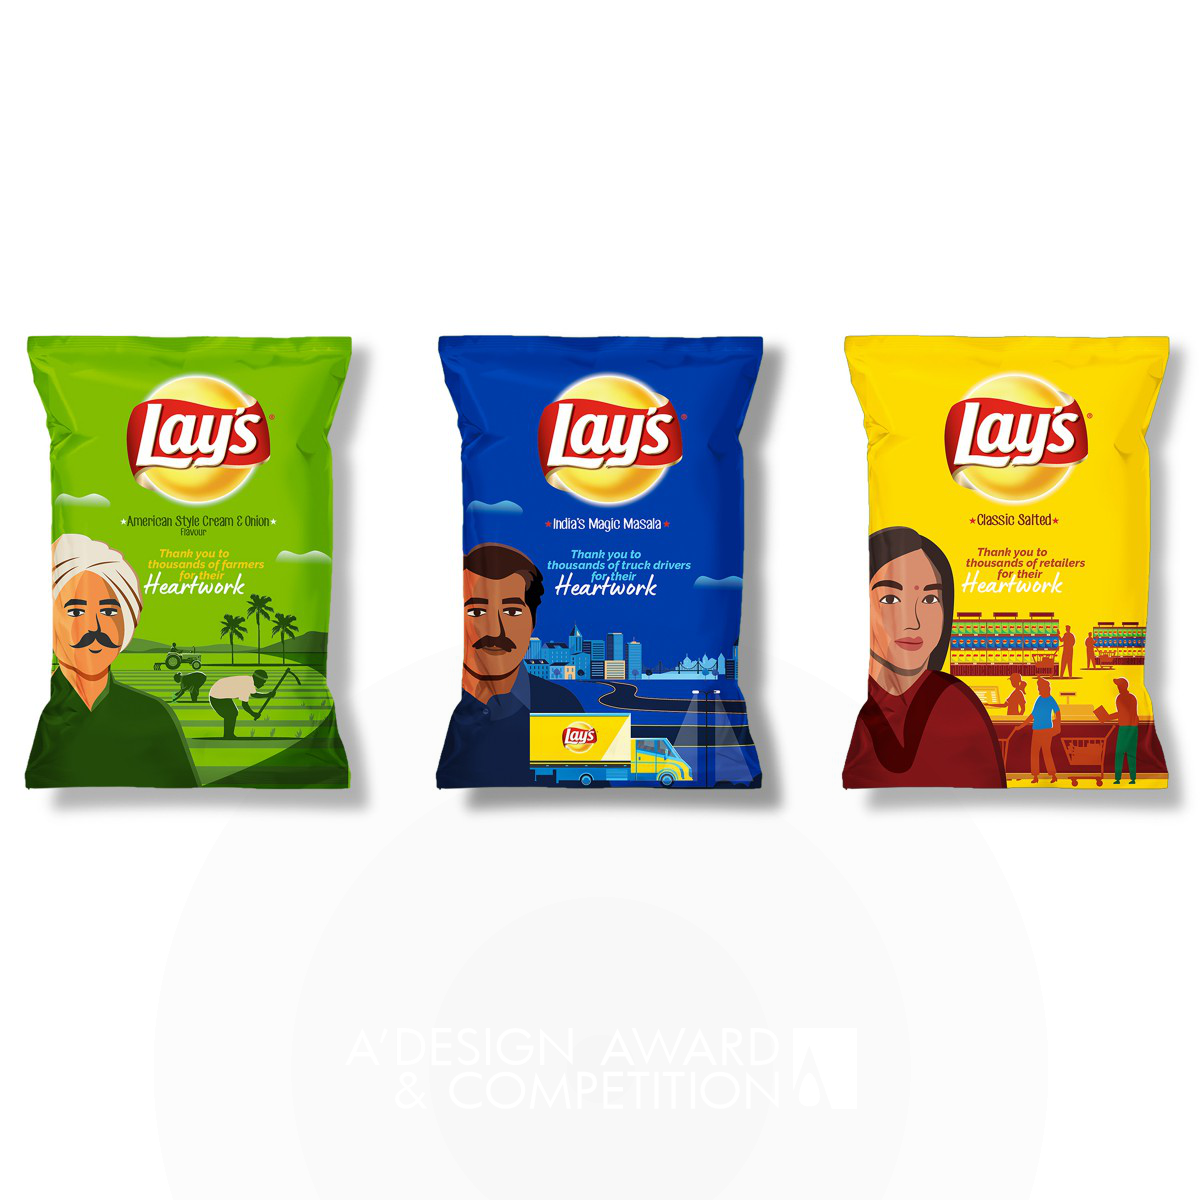 Lays Heartwork Campaign  by PepsiCo Design and Innovation